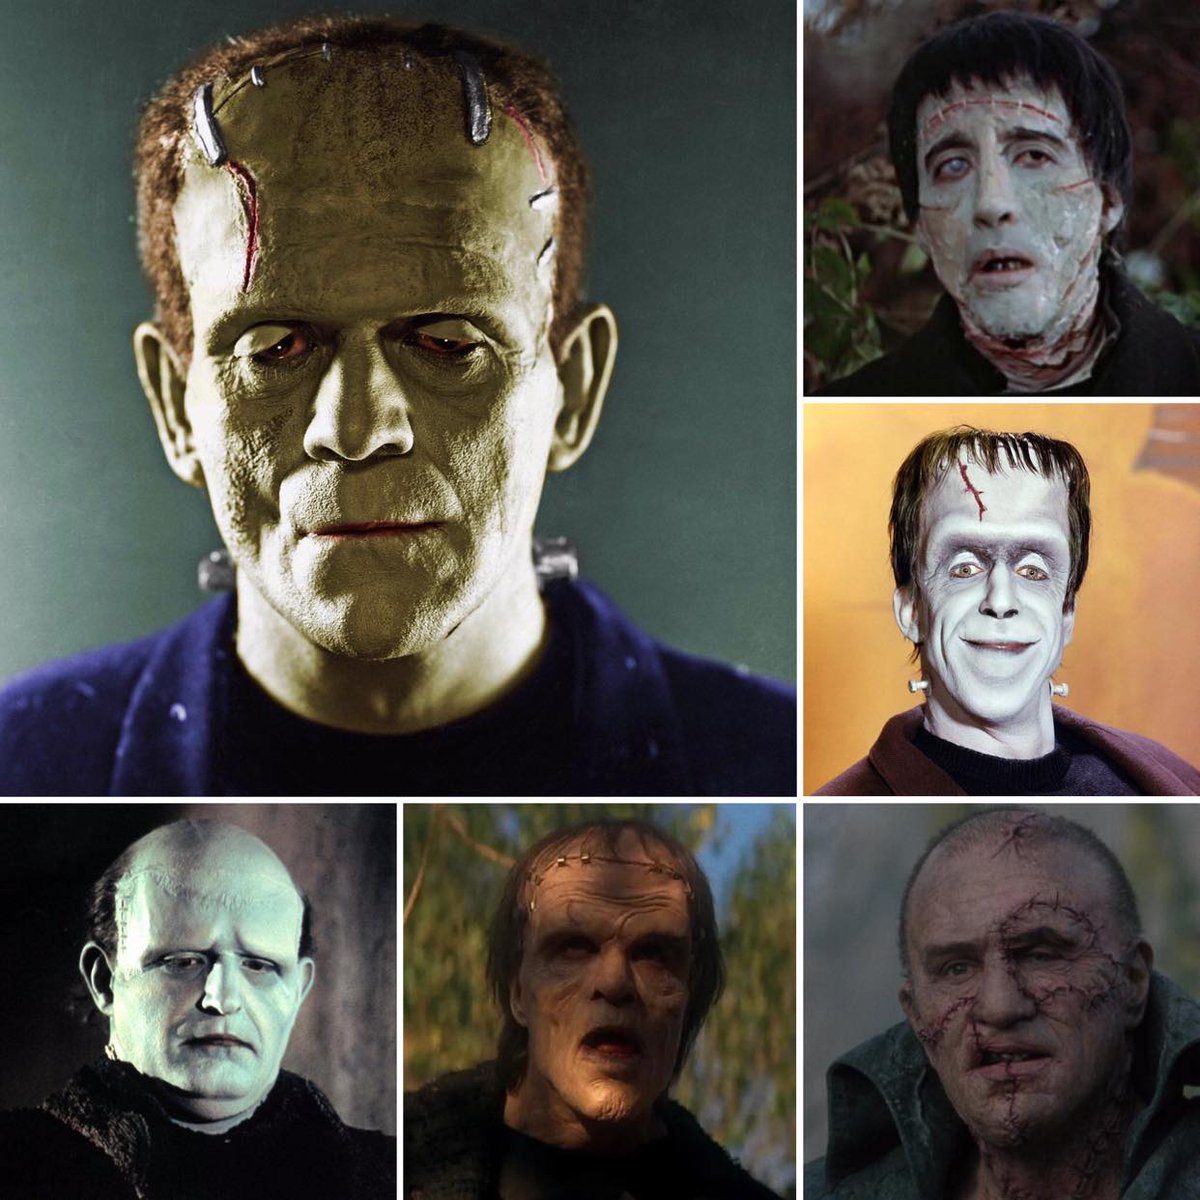 Who's your fave version of Frankenstein's Monster? Boris Karloff or one of the other classic Universal Monsters Frankenstein actors? Christopher Lee? Perhaps you're more of a fan of The Munsters or The Monster Squad? Sound off! #Frankenstein #FrankensteinsMonster #MaryShelley